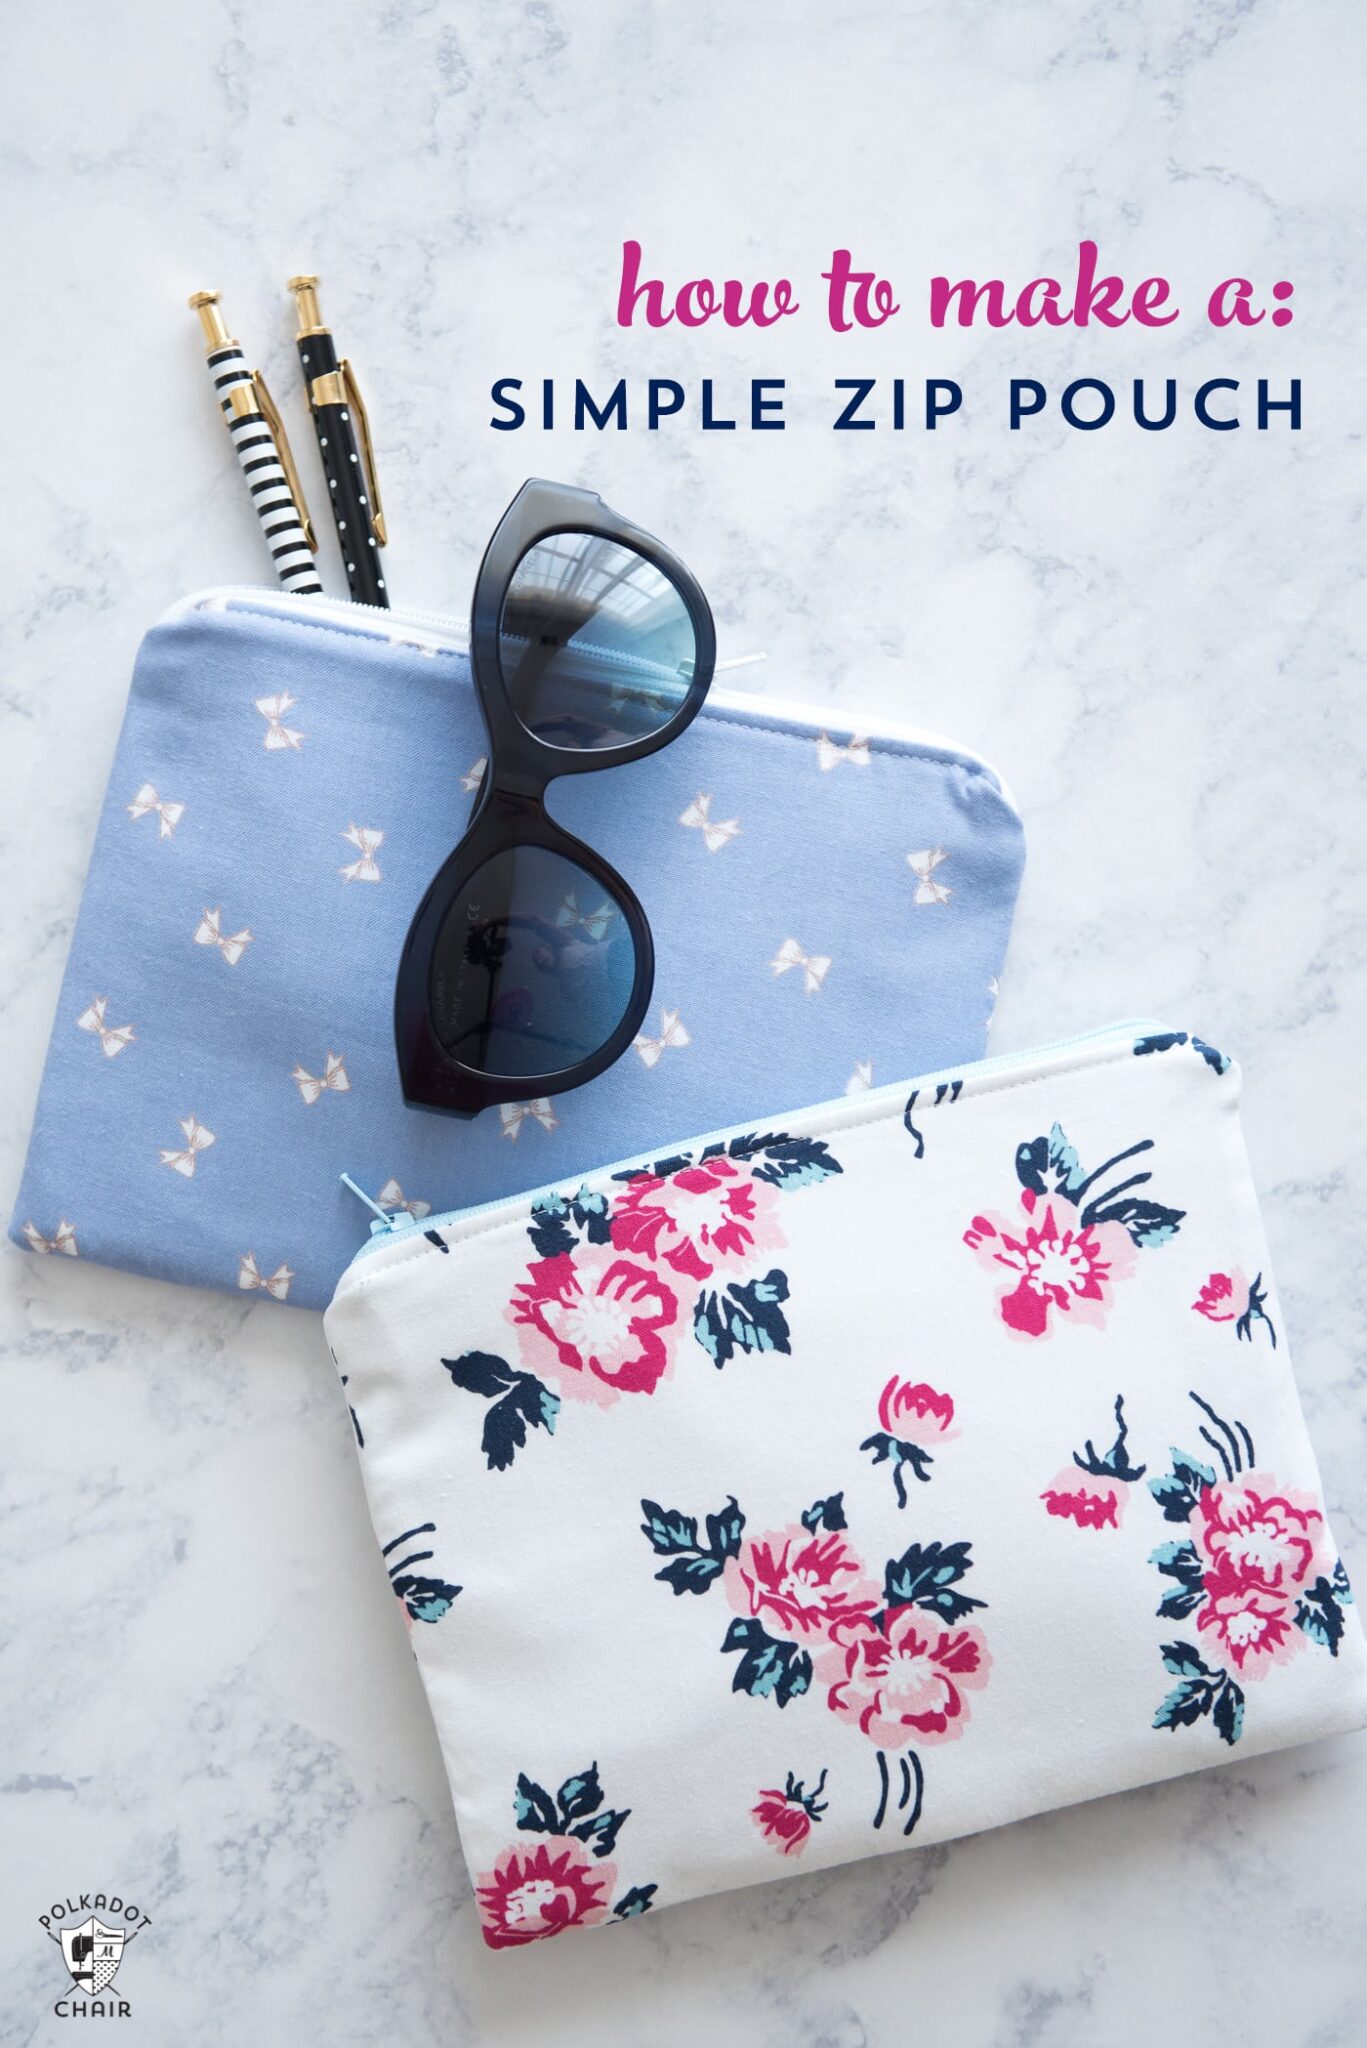 How to Make a Simple Zipper Pouch - The Polka Dot Chair